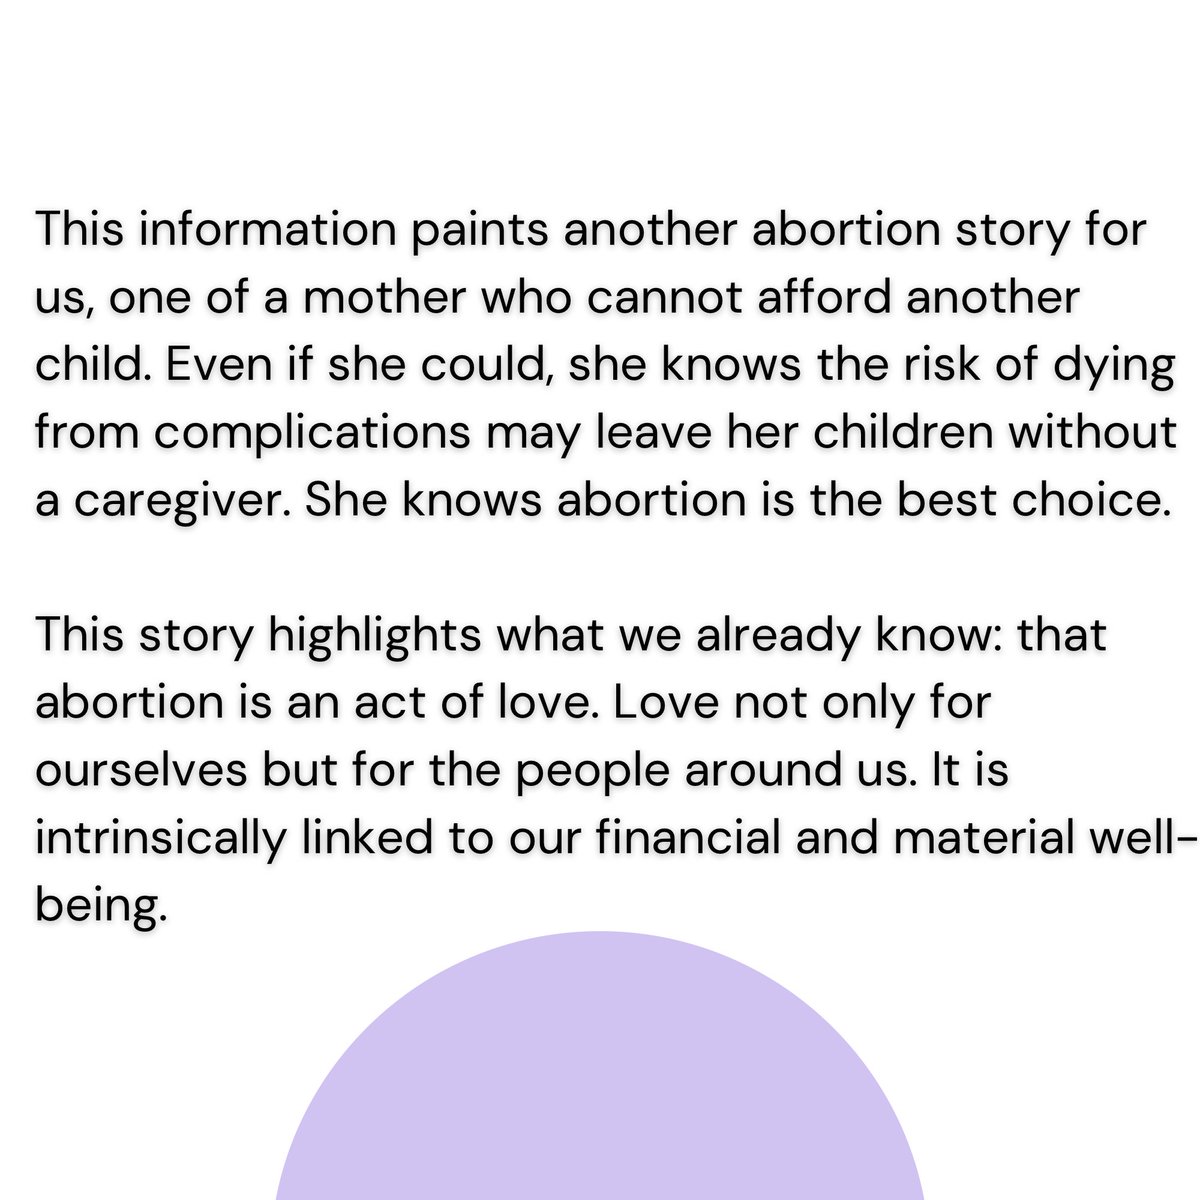 This information paints another abortion story for us, one of a mother who cannot afford another child. Even if she could, she knows the risk of dying from complications may leave her children without a caregiver. She knows abortion is the best choice.